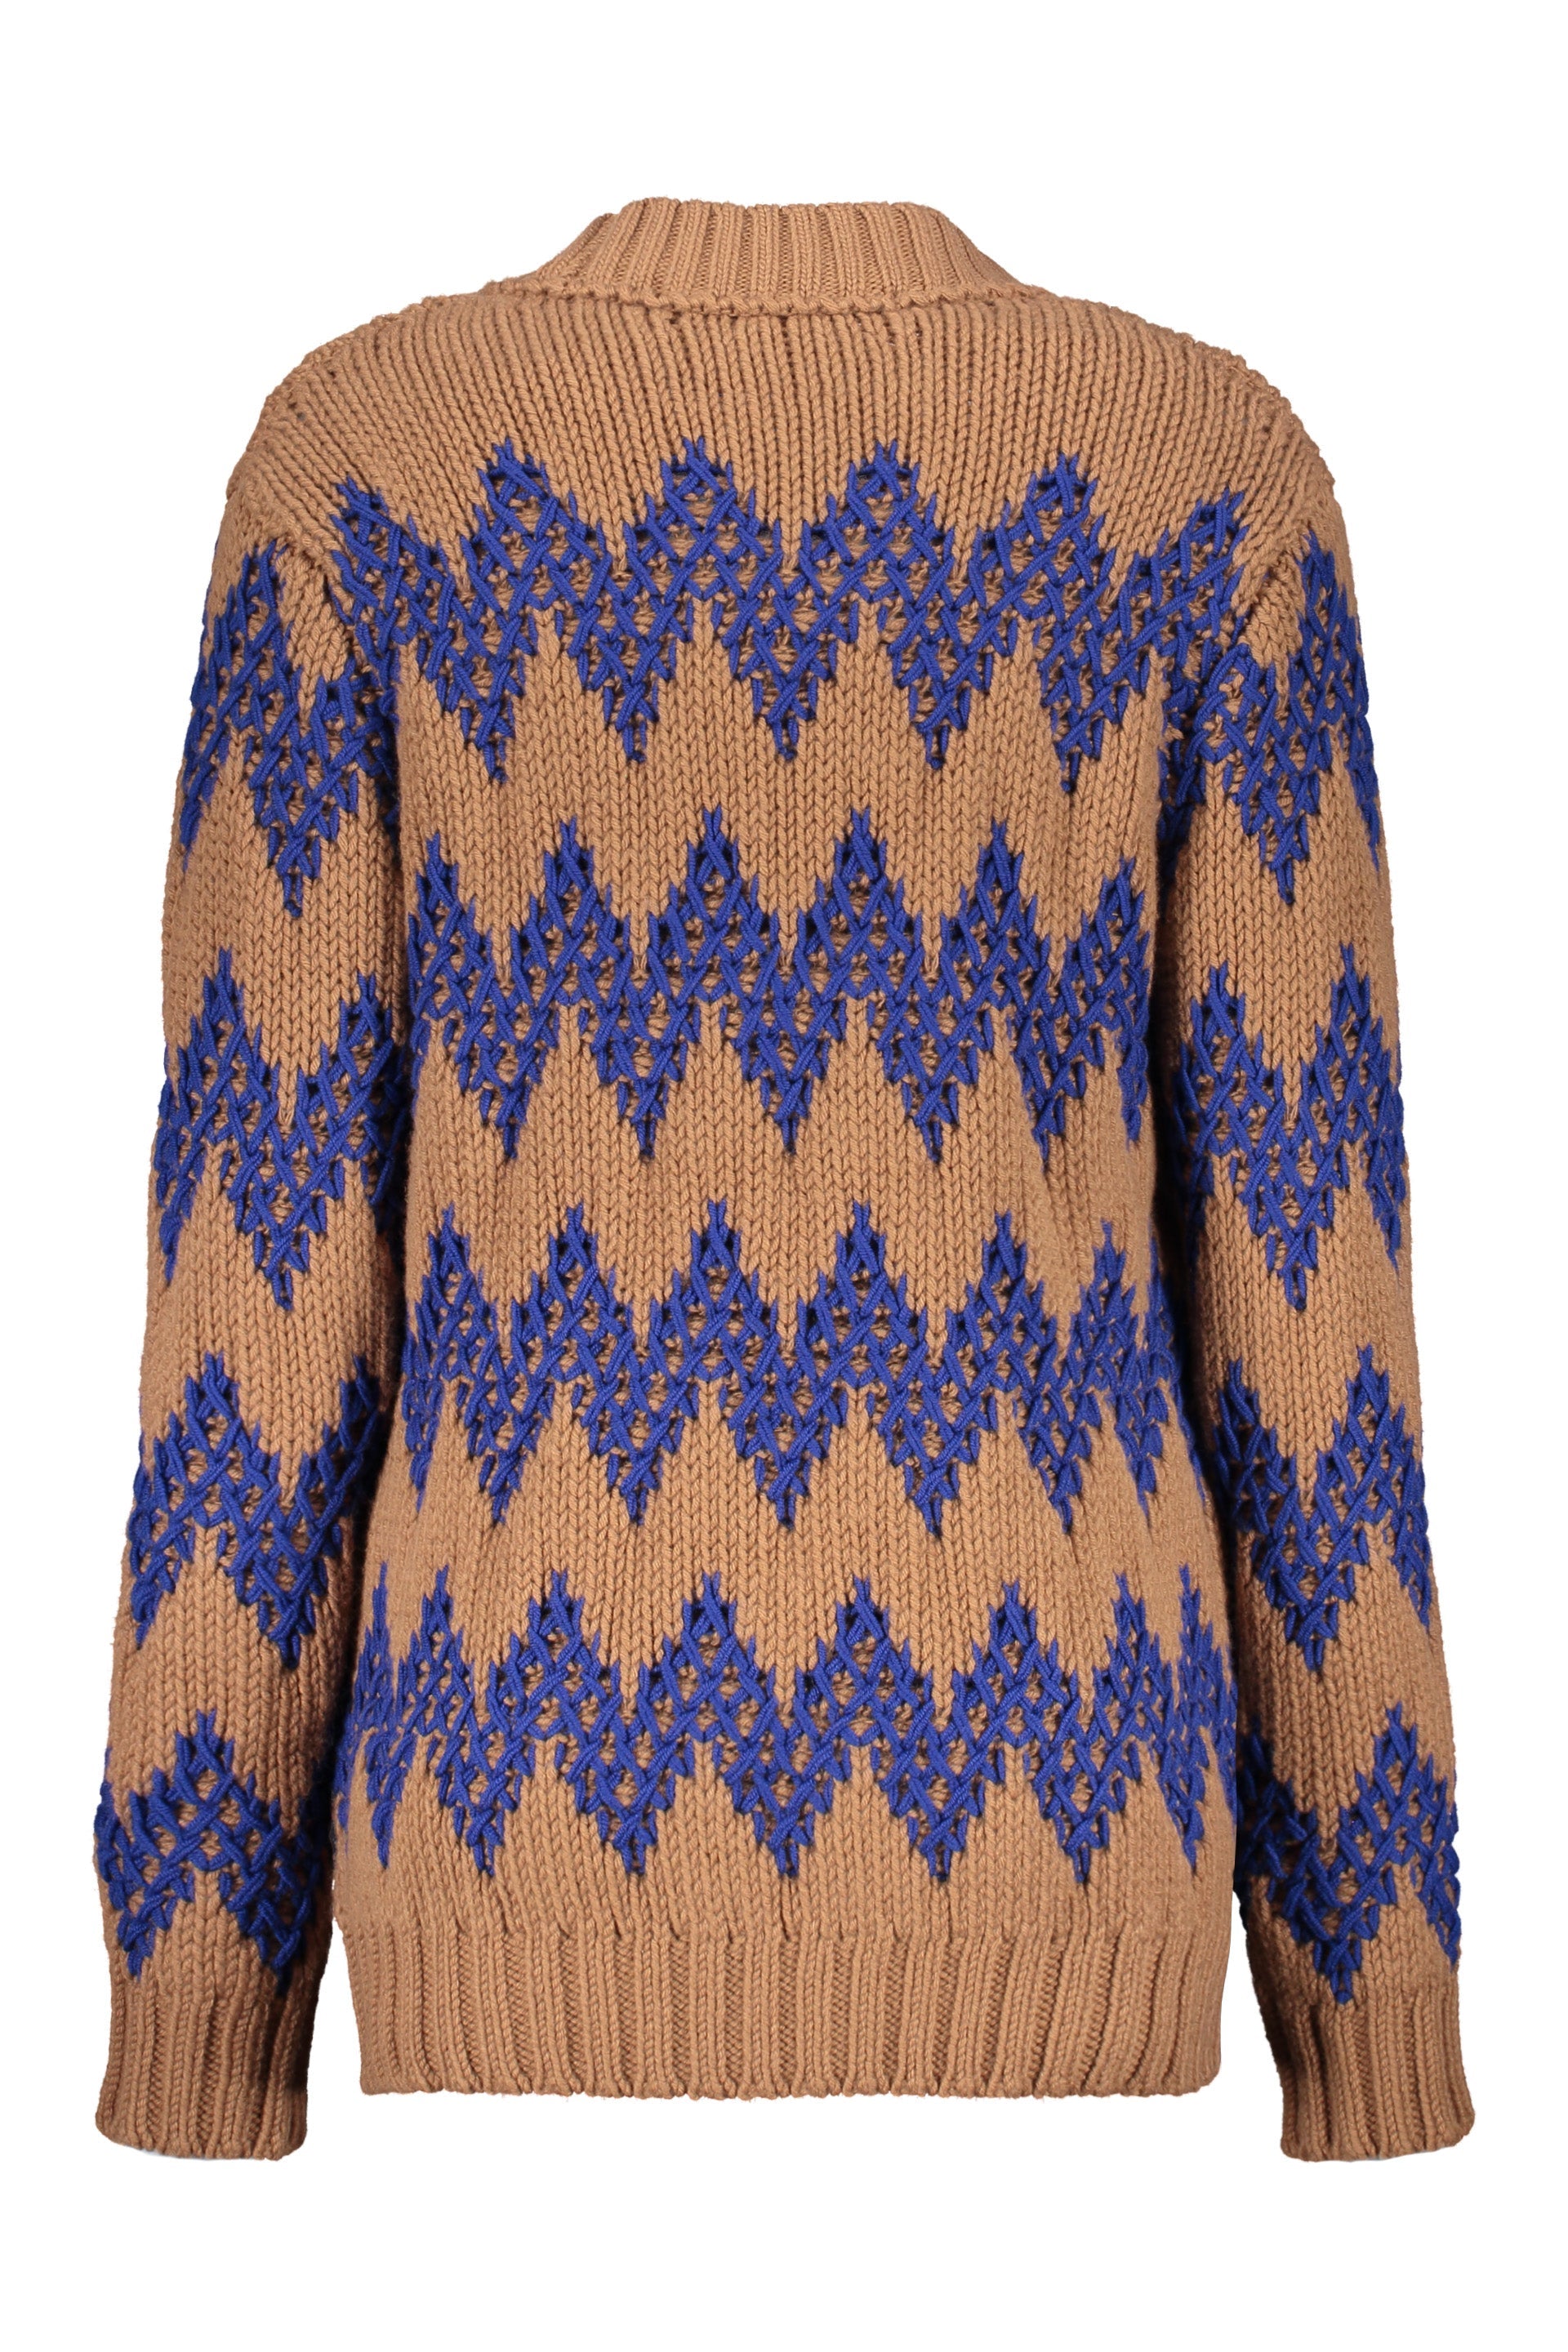 Missoni-OUTLET-SALE-Wool-cardigan-Strick-XS-ARCHIVE-COLLECTION-2.jpg